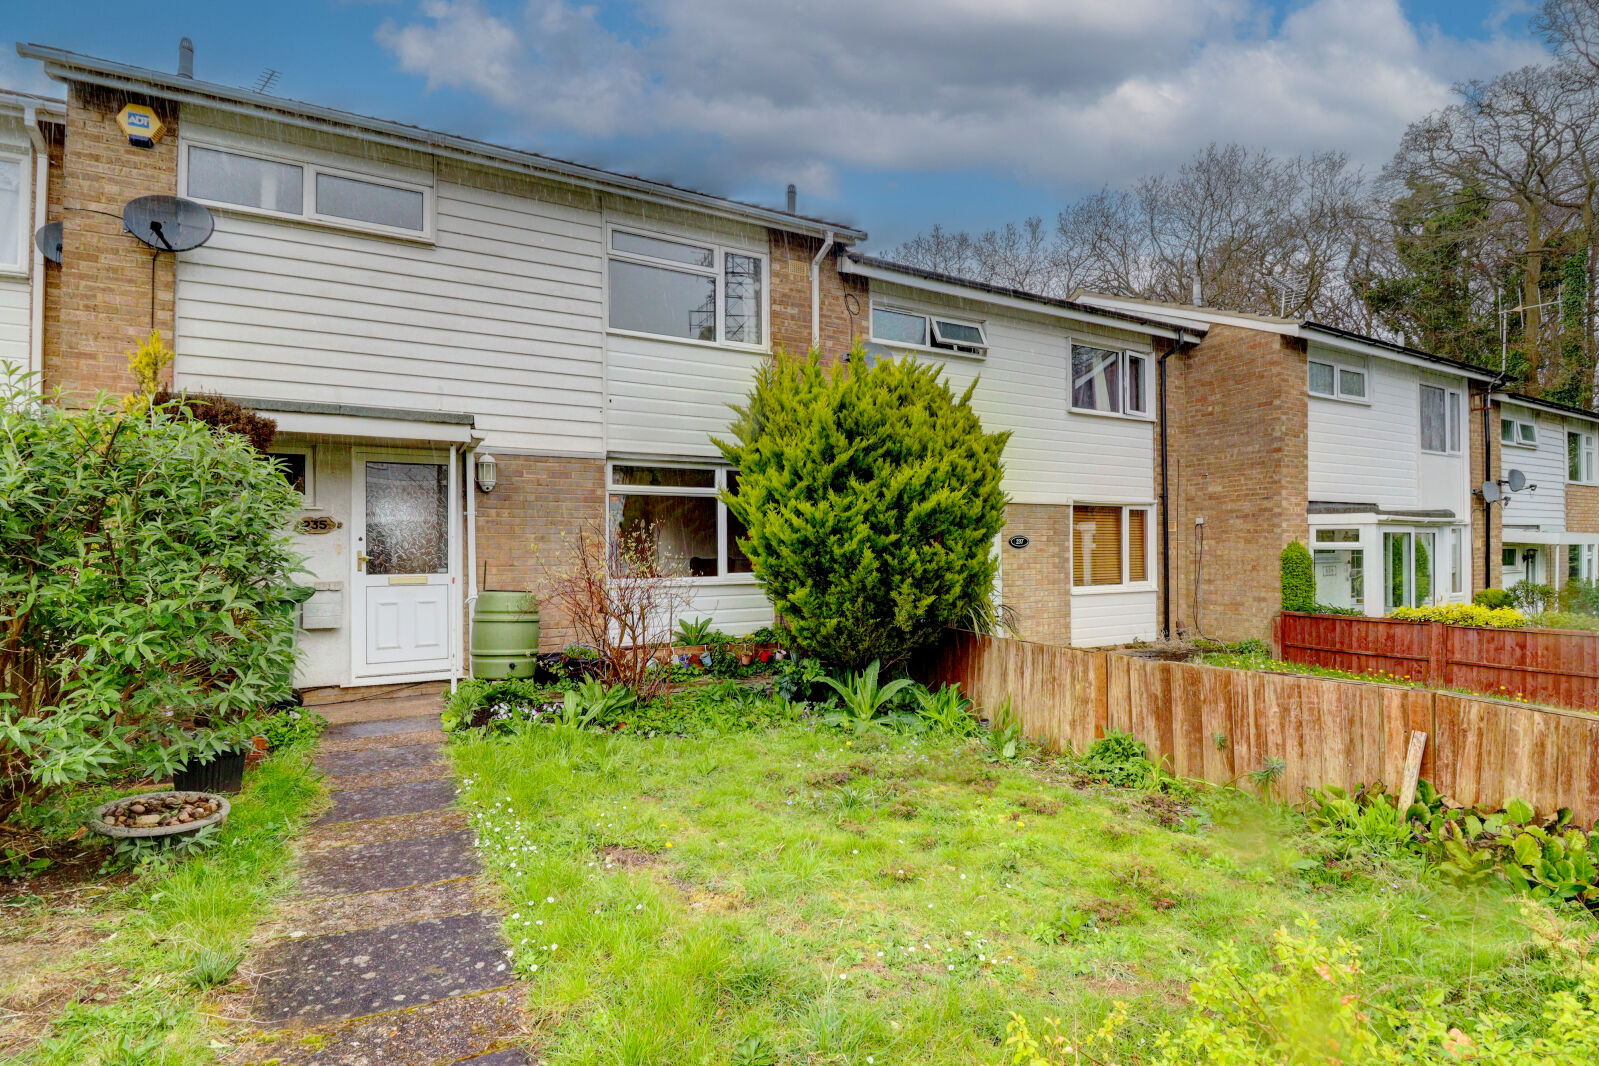 3 bedroom mid terraced house for sale Hithercroft Road, High Wycombe, HP13, main image